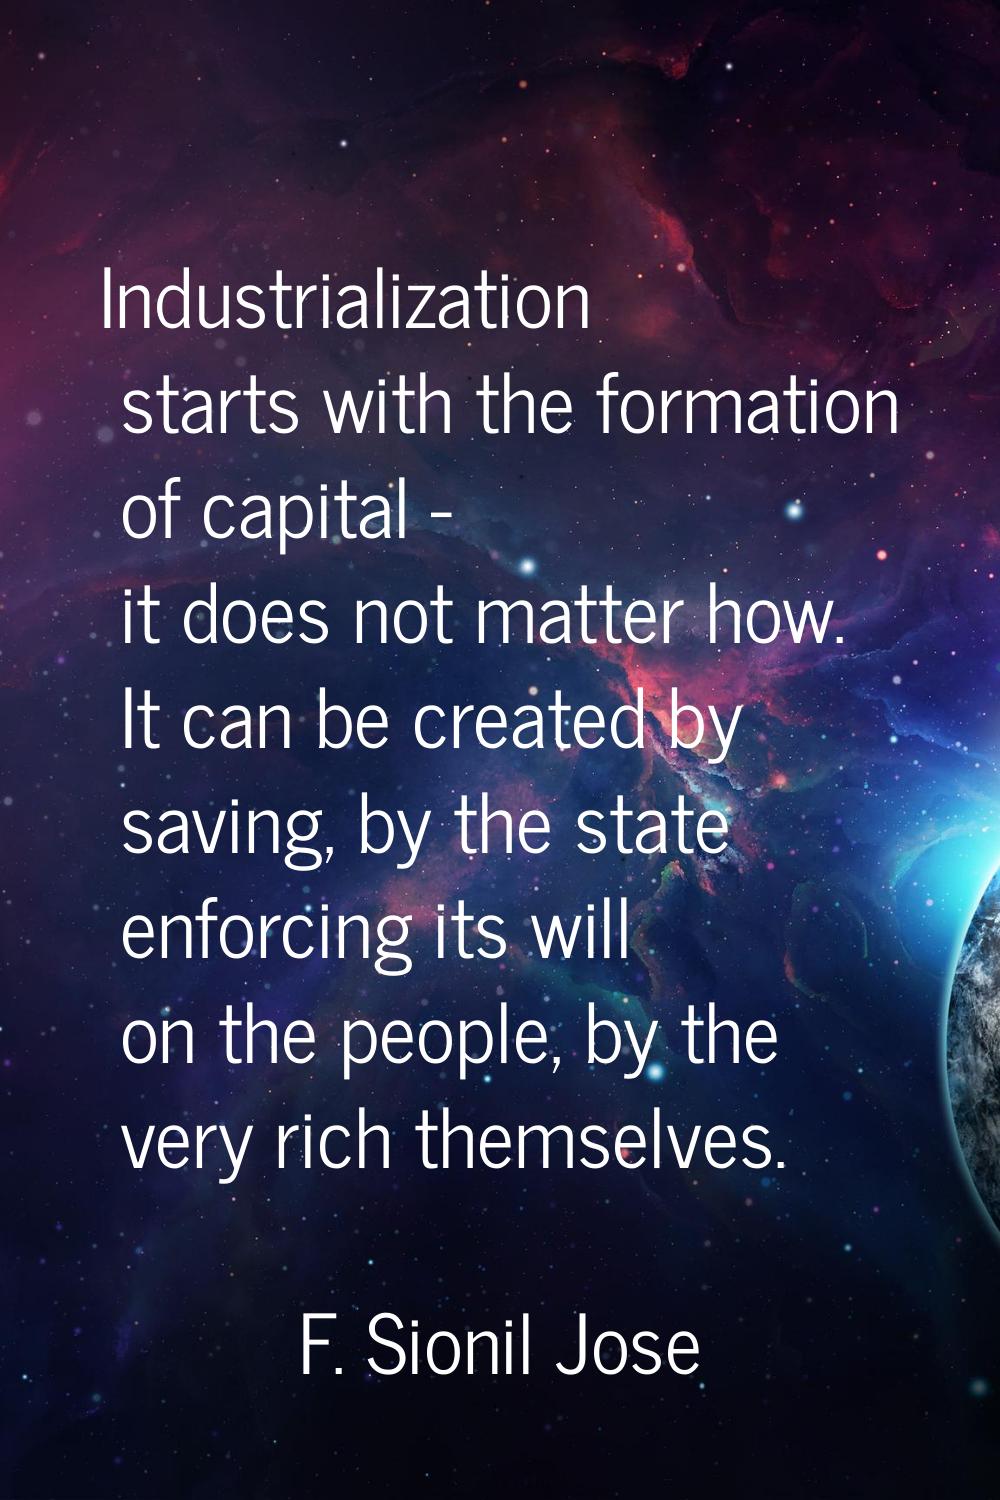 Industrialization starts with the formation of capital - it does not matter how. It can be created 